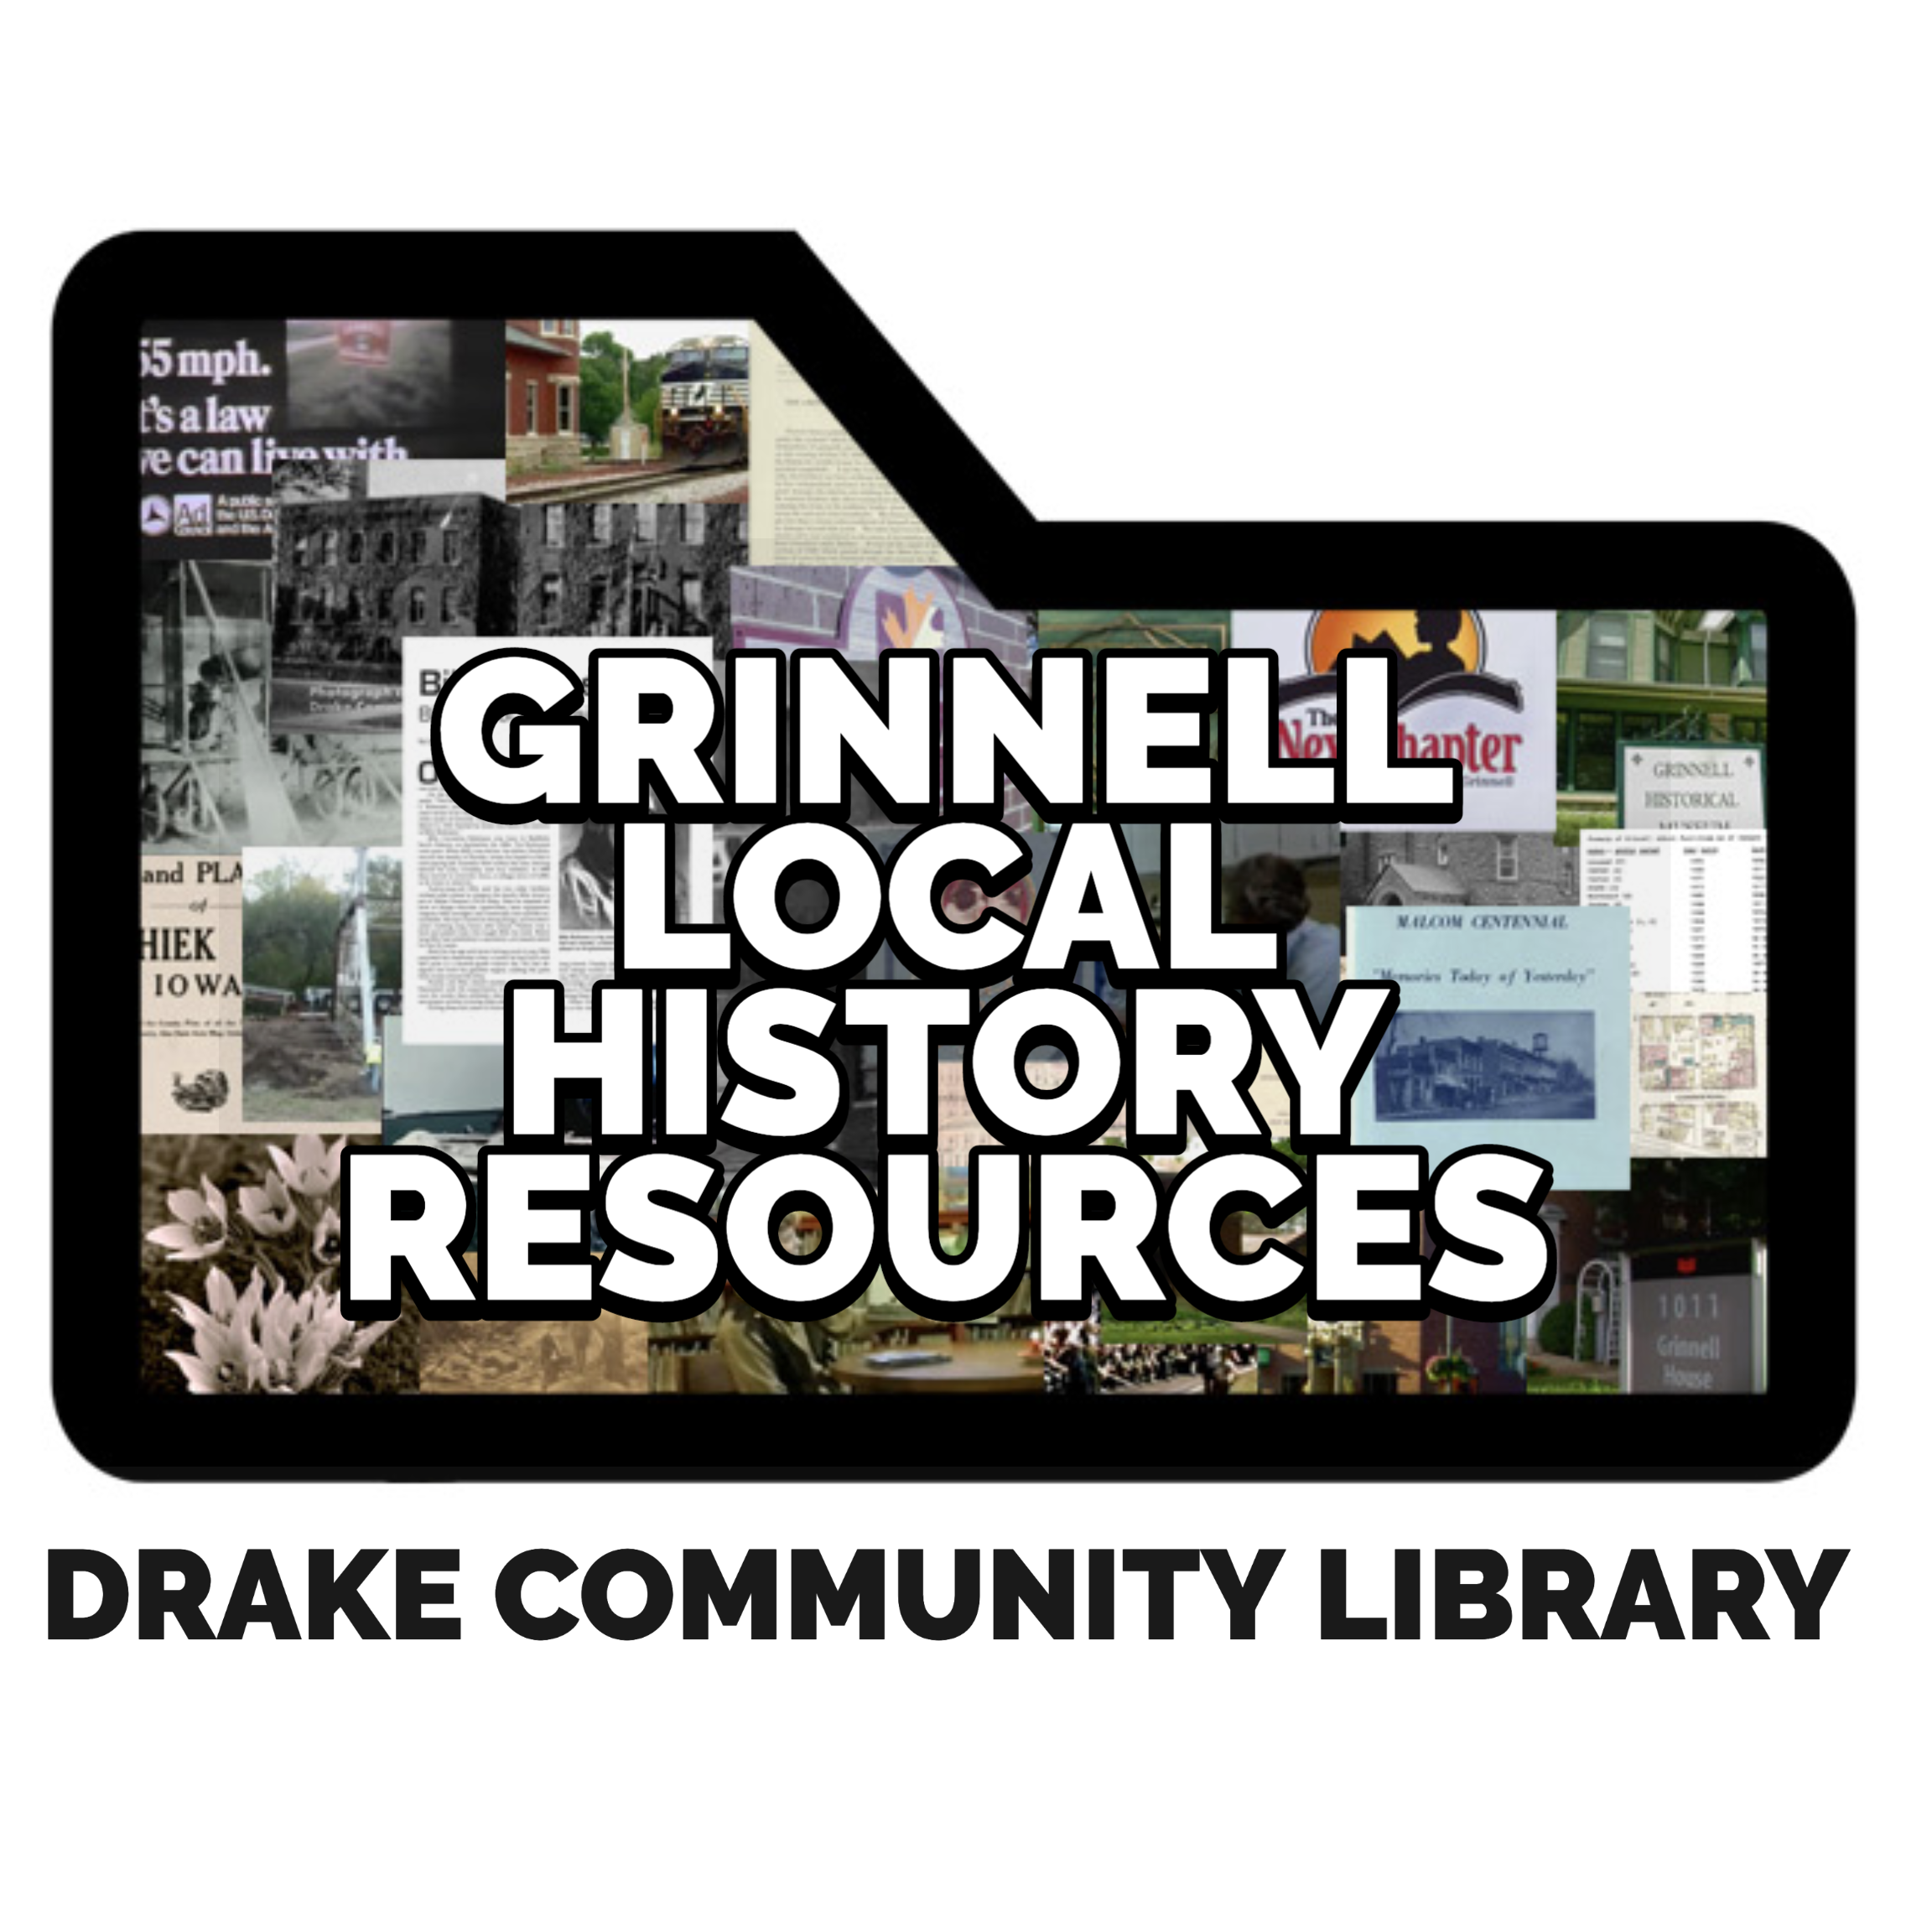 Grinnell Local History Resources